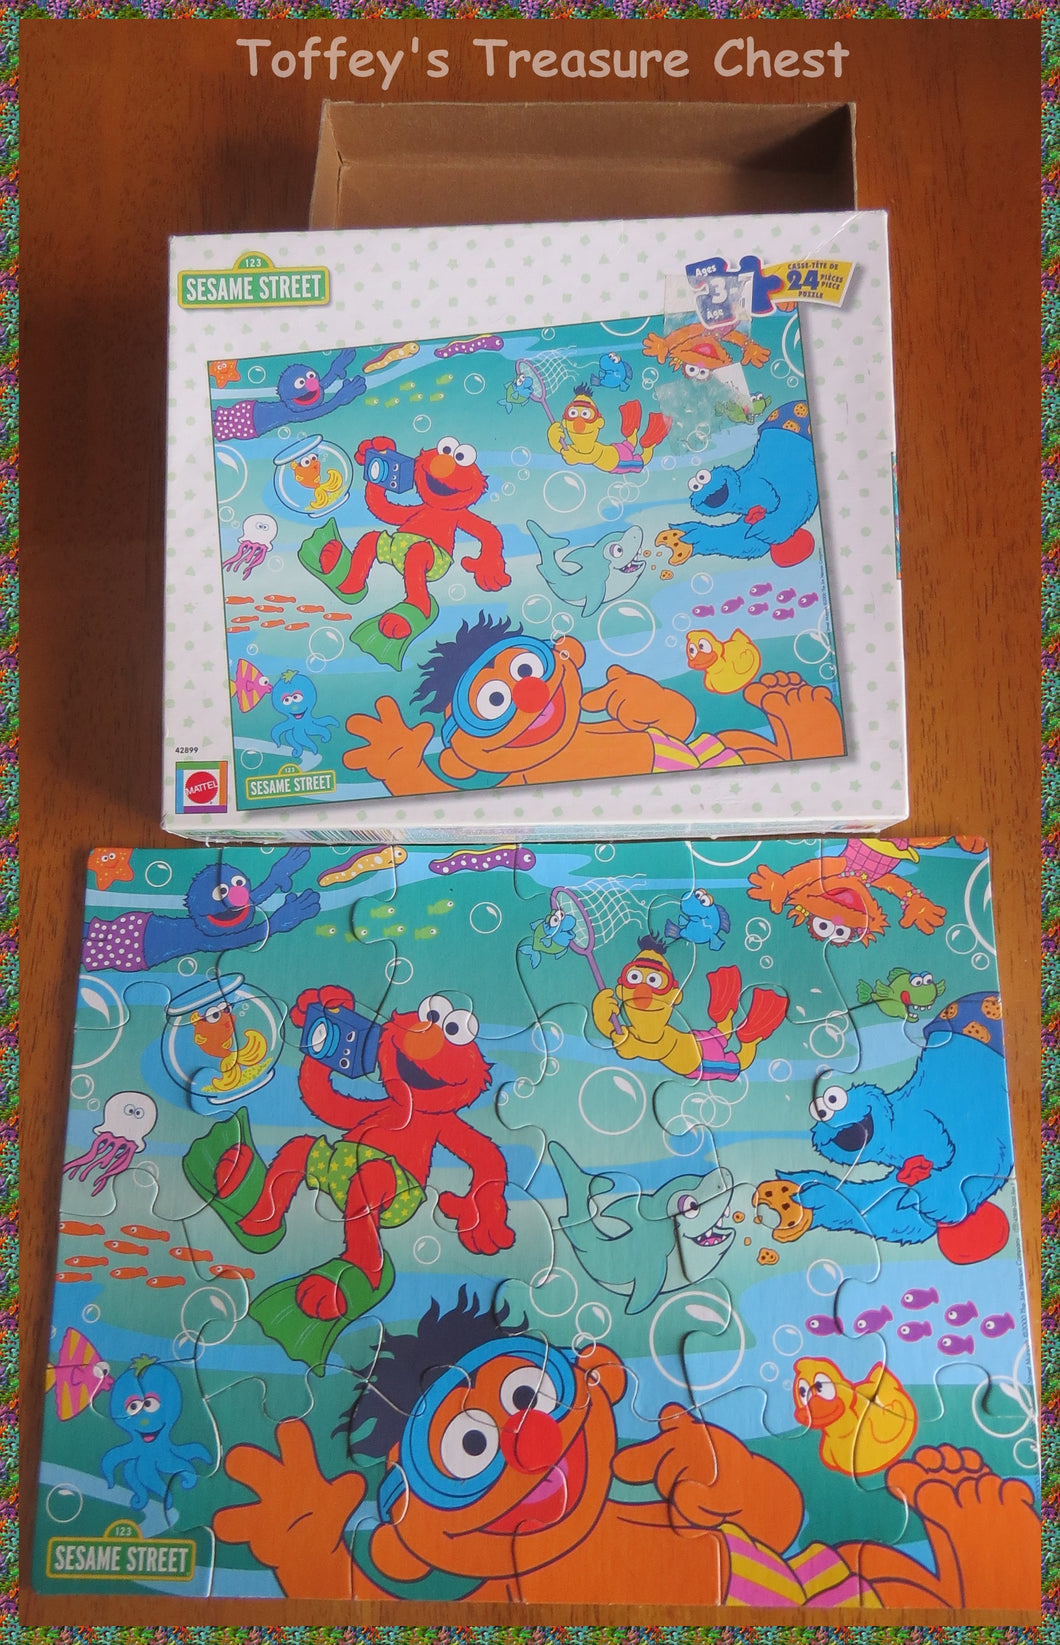 SESAME STREET - puzzle 24 pcs - complete with box